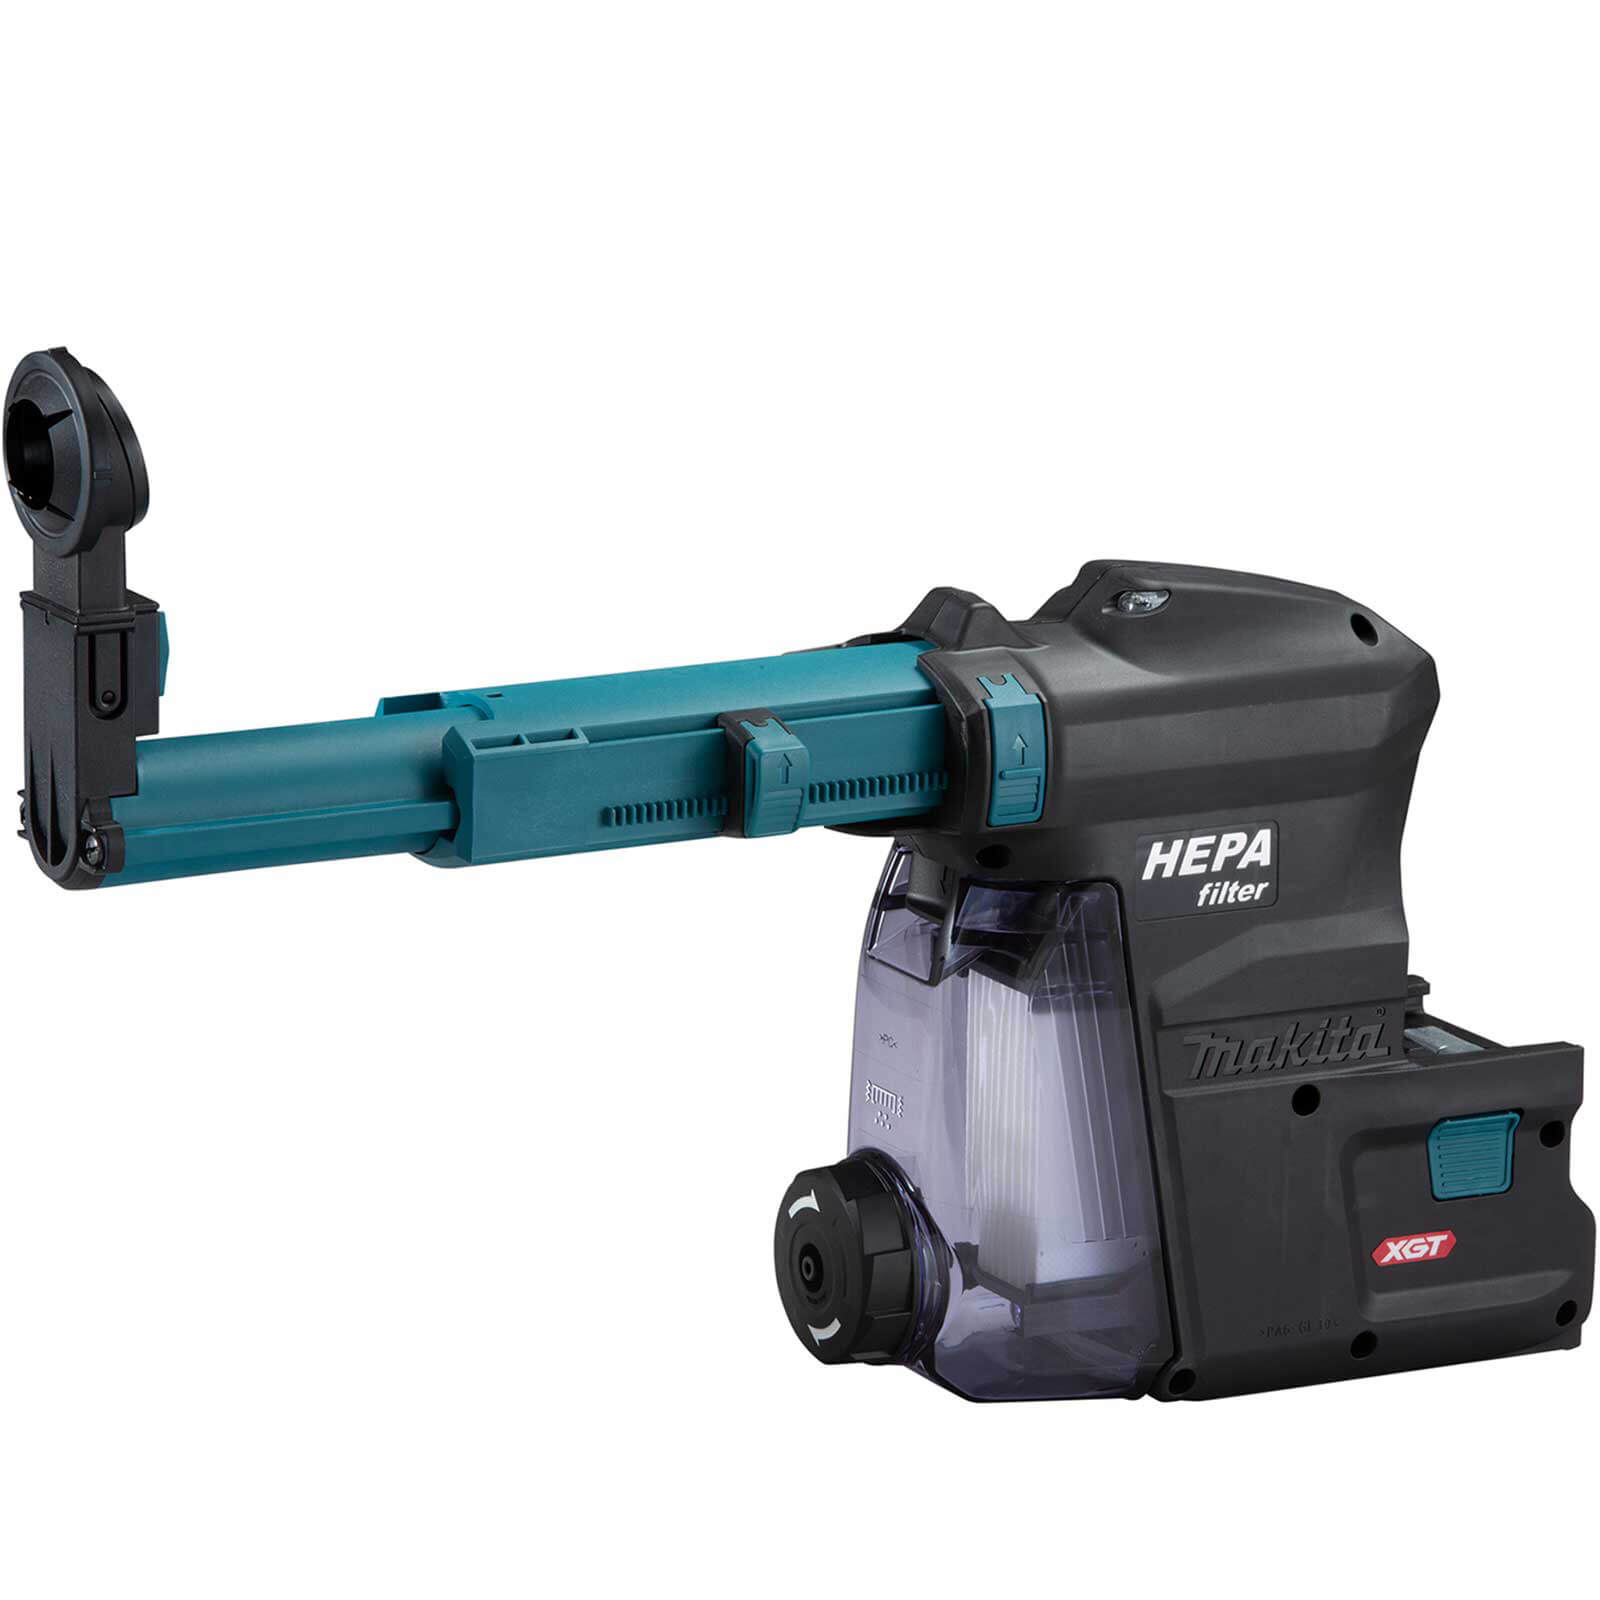 Photo of Makita Dx14 Xgt Dust Extraction Attachment